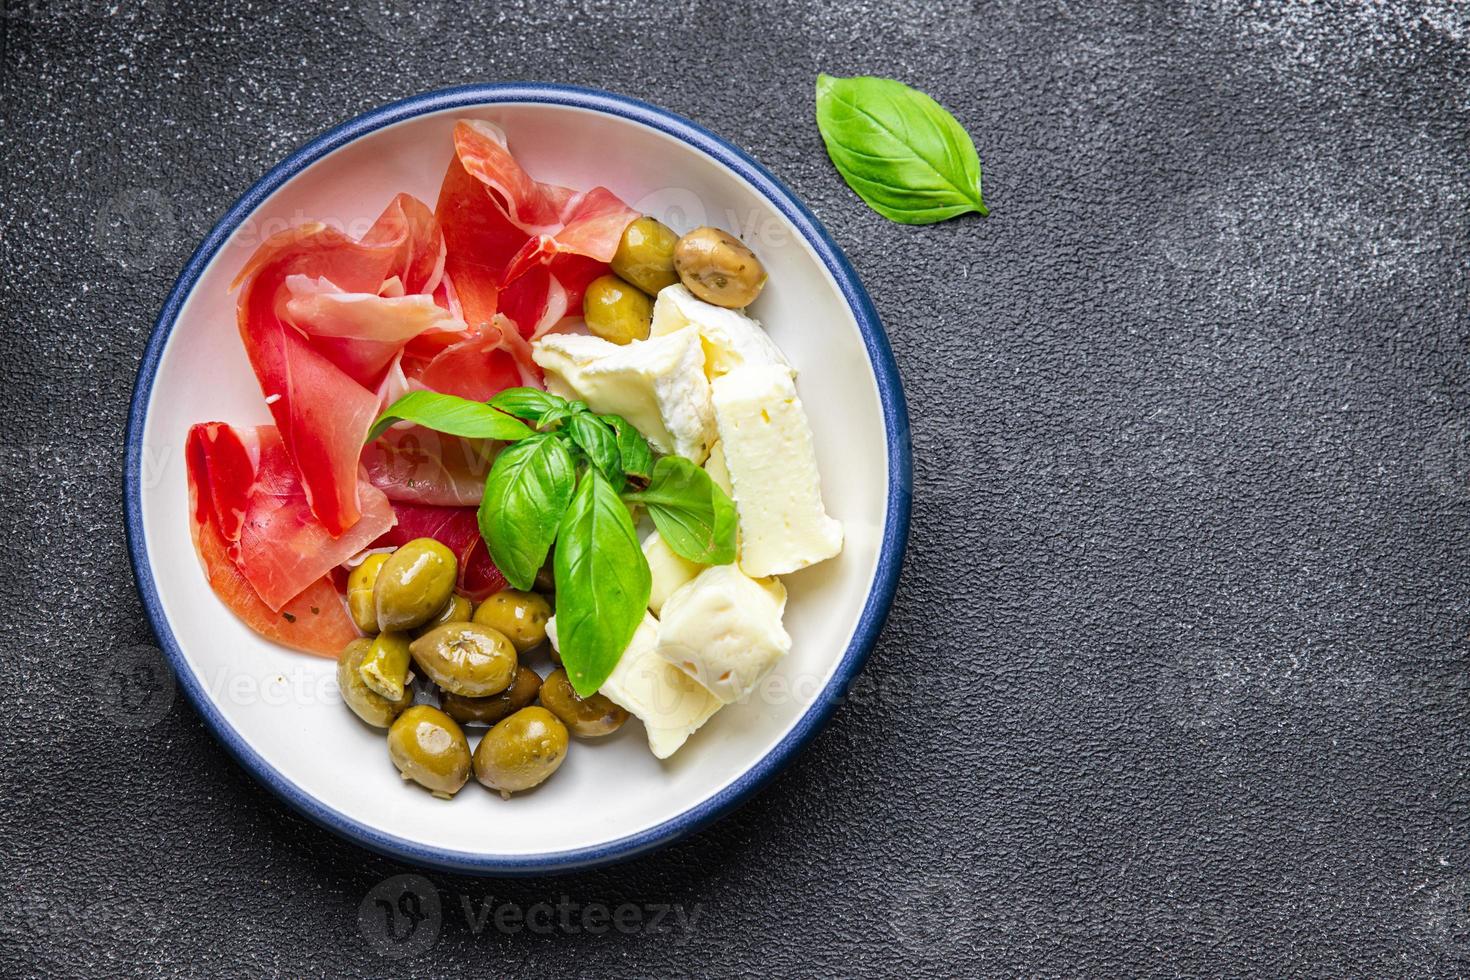 meat platter or cheese platter jamon, cheese, olives healthy meal food snack on the table copy space food background photo